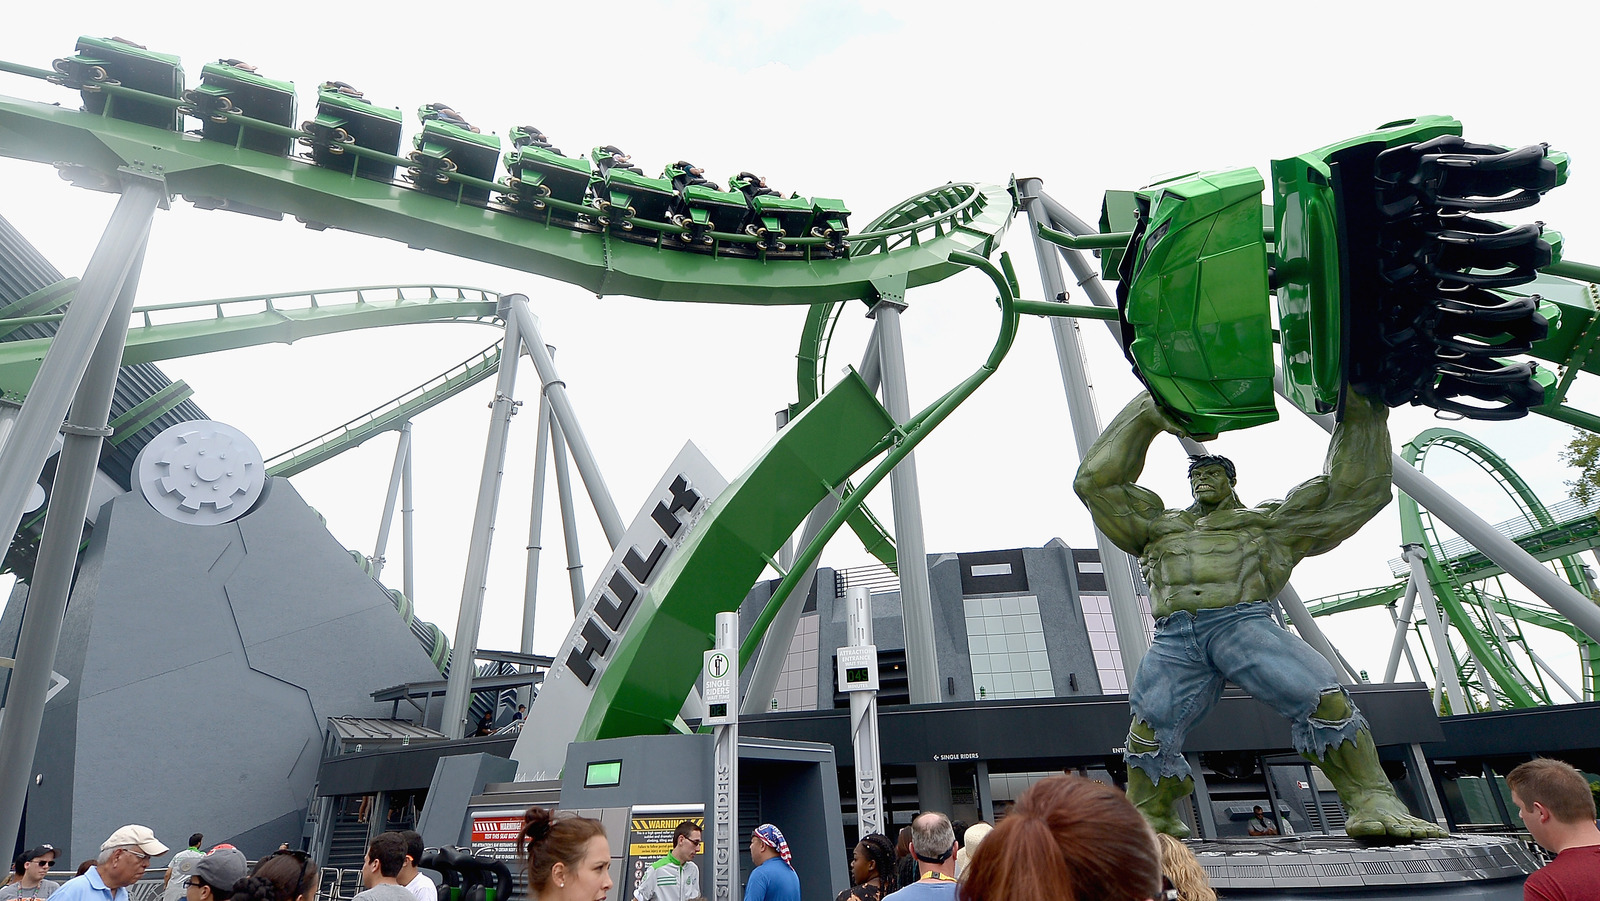 Rock 'n' Roller Coaster Is One of Disney's Most Thrilling Rides - Here's  How It Works